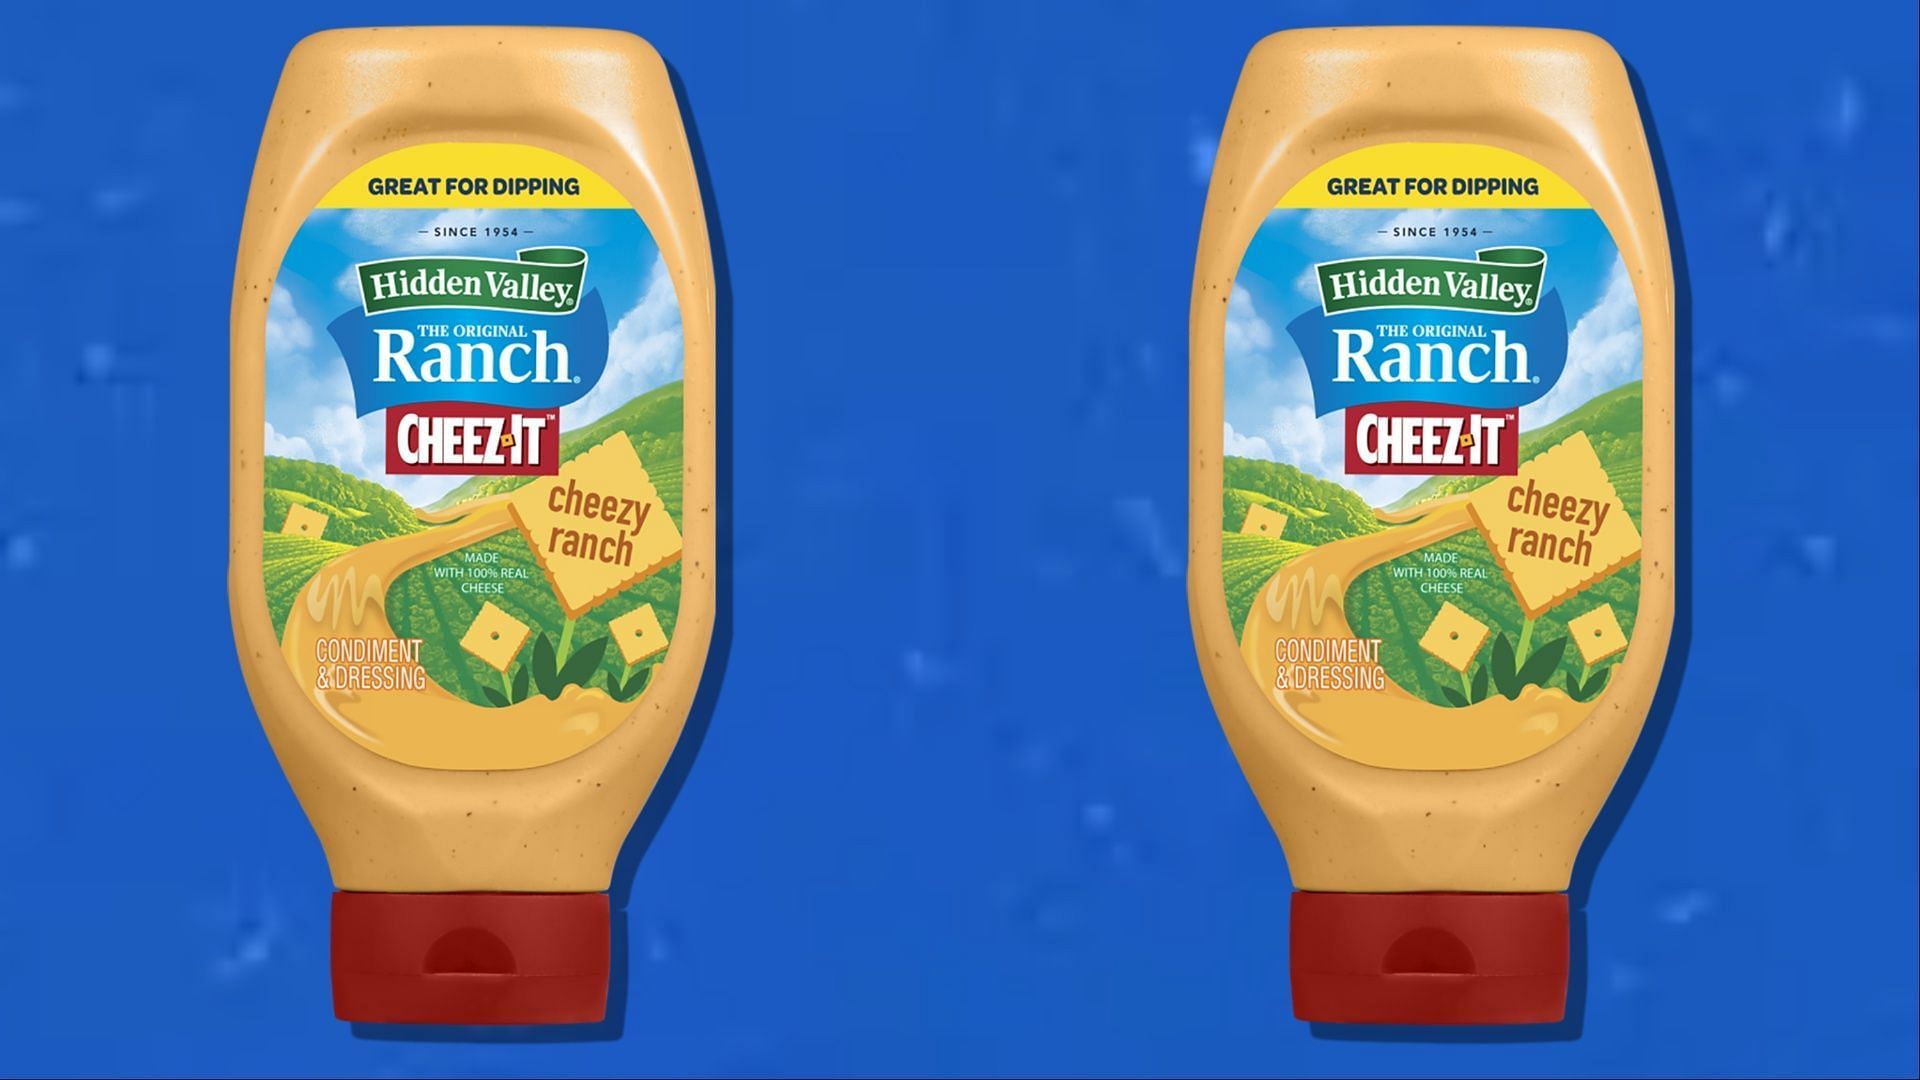 The new Cheezy Ranch hits stores nationwide this March (Image via H. Valley Ranch)